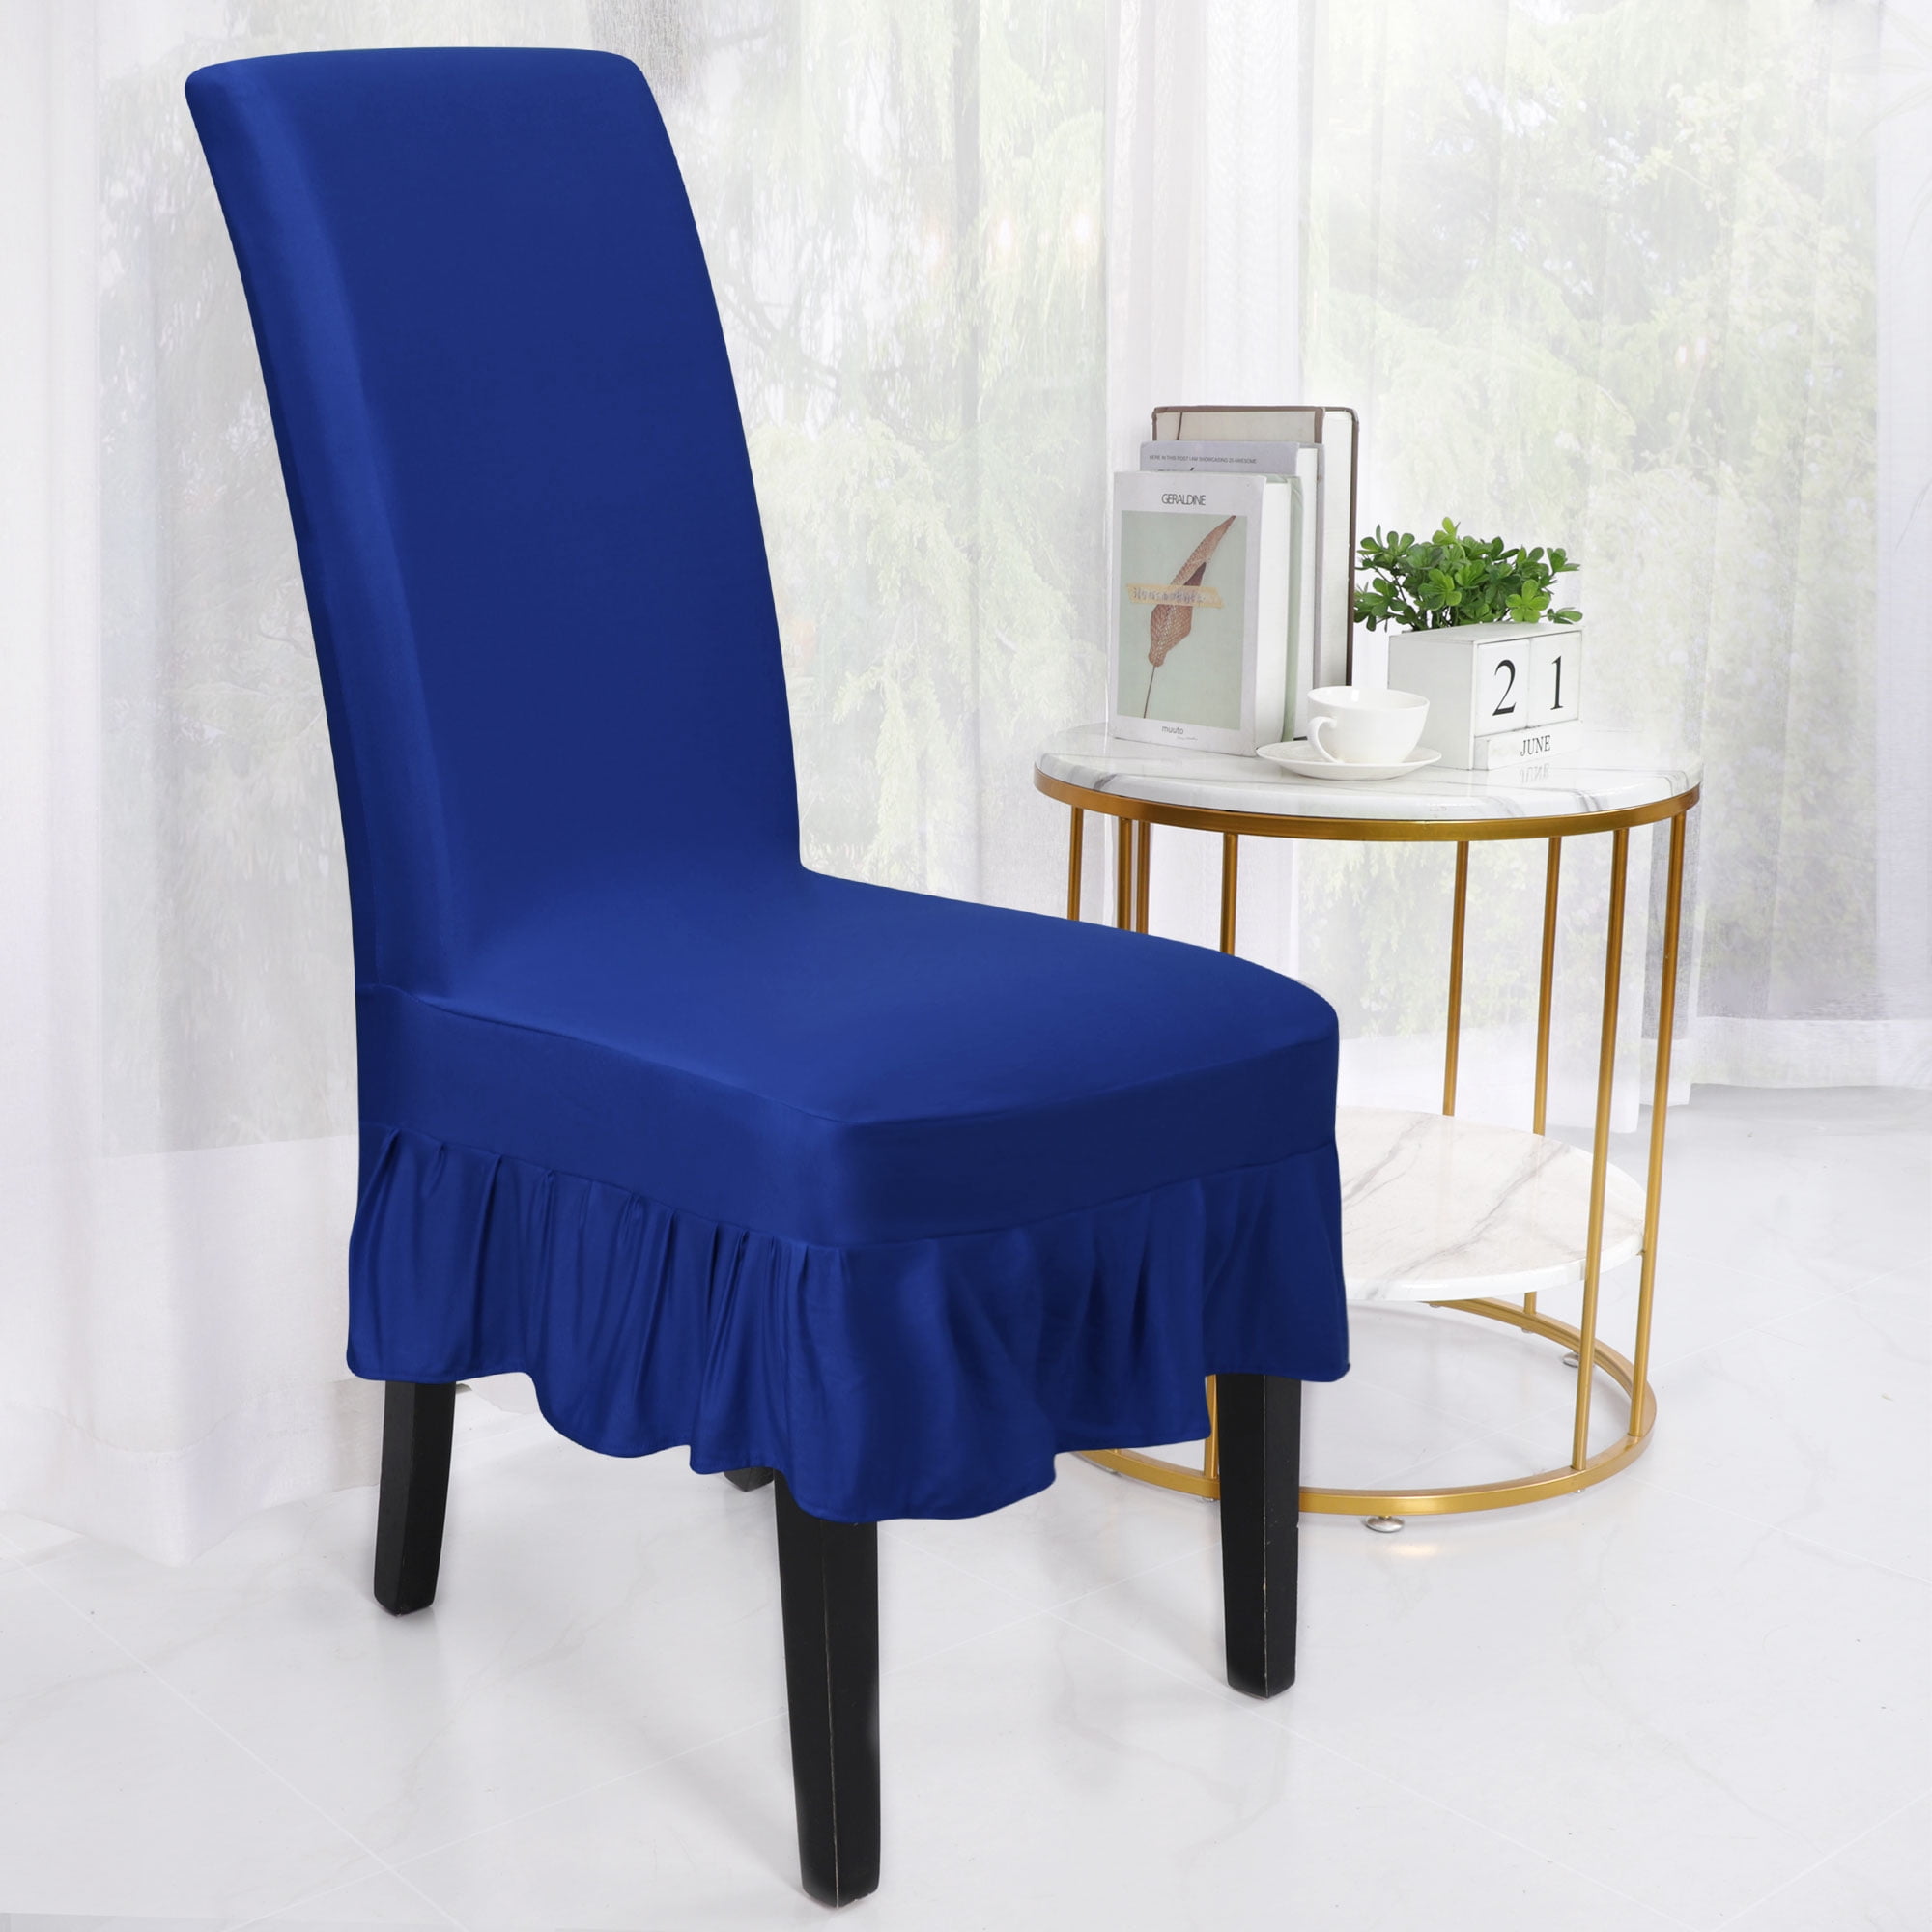 Details about   1-4x Large Solid Stretch Chair Cover Wedding Banquet Seat Slipcovers Dining Room 